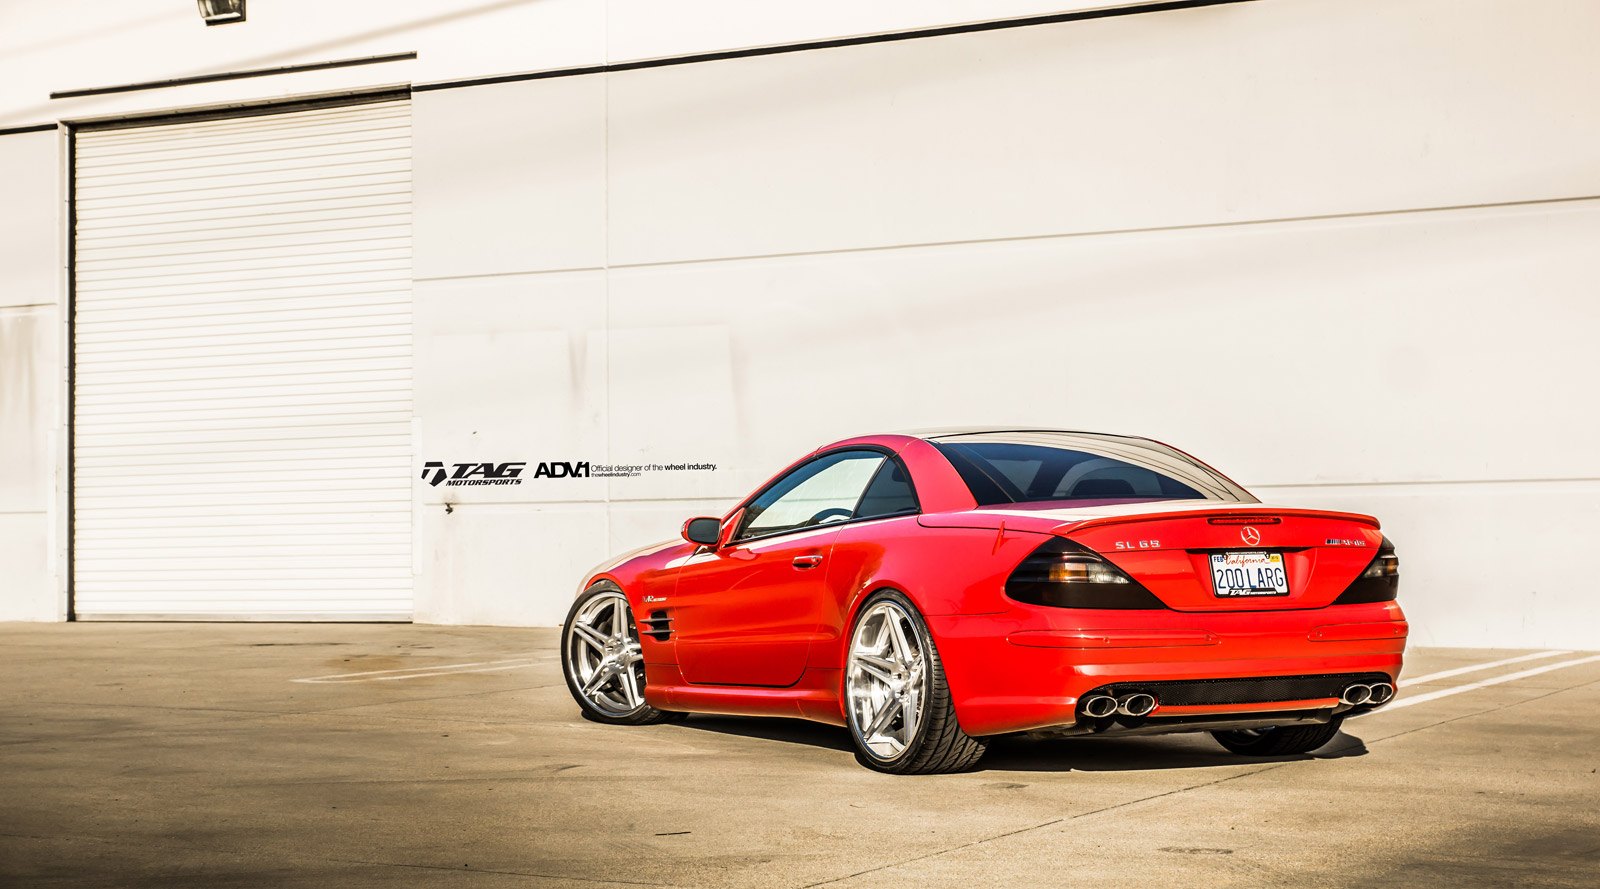 Red Smoke Taillights on Custom Mercedes SL Class - Photo by ADV.1